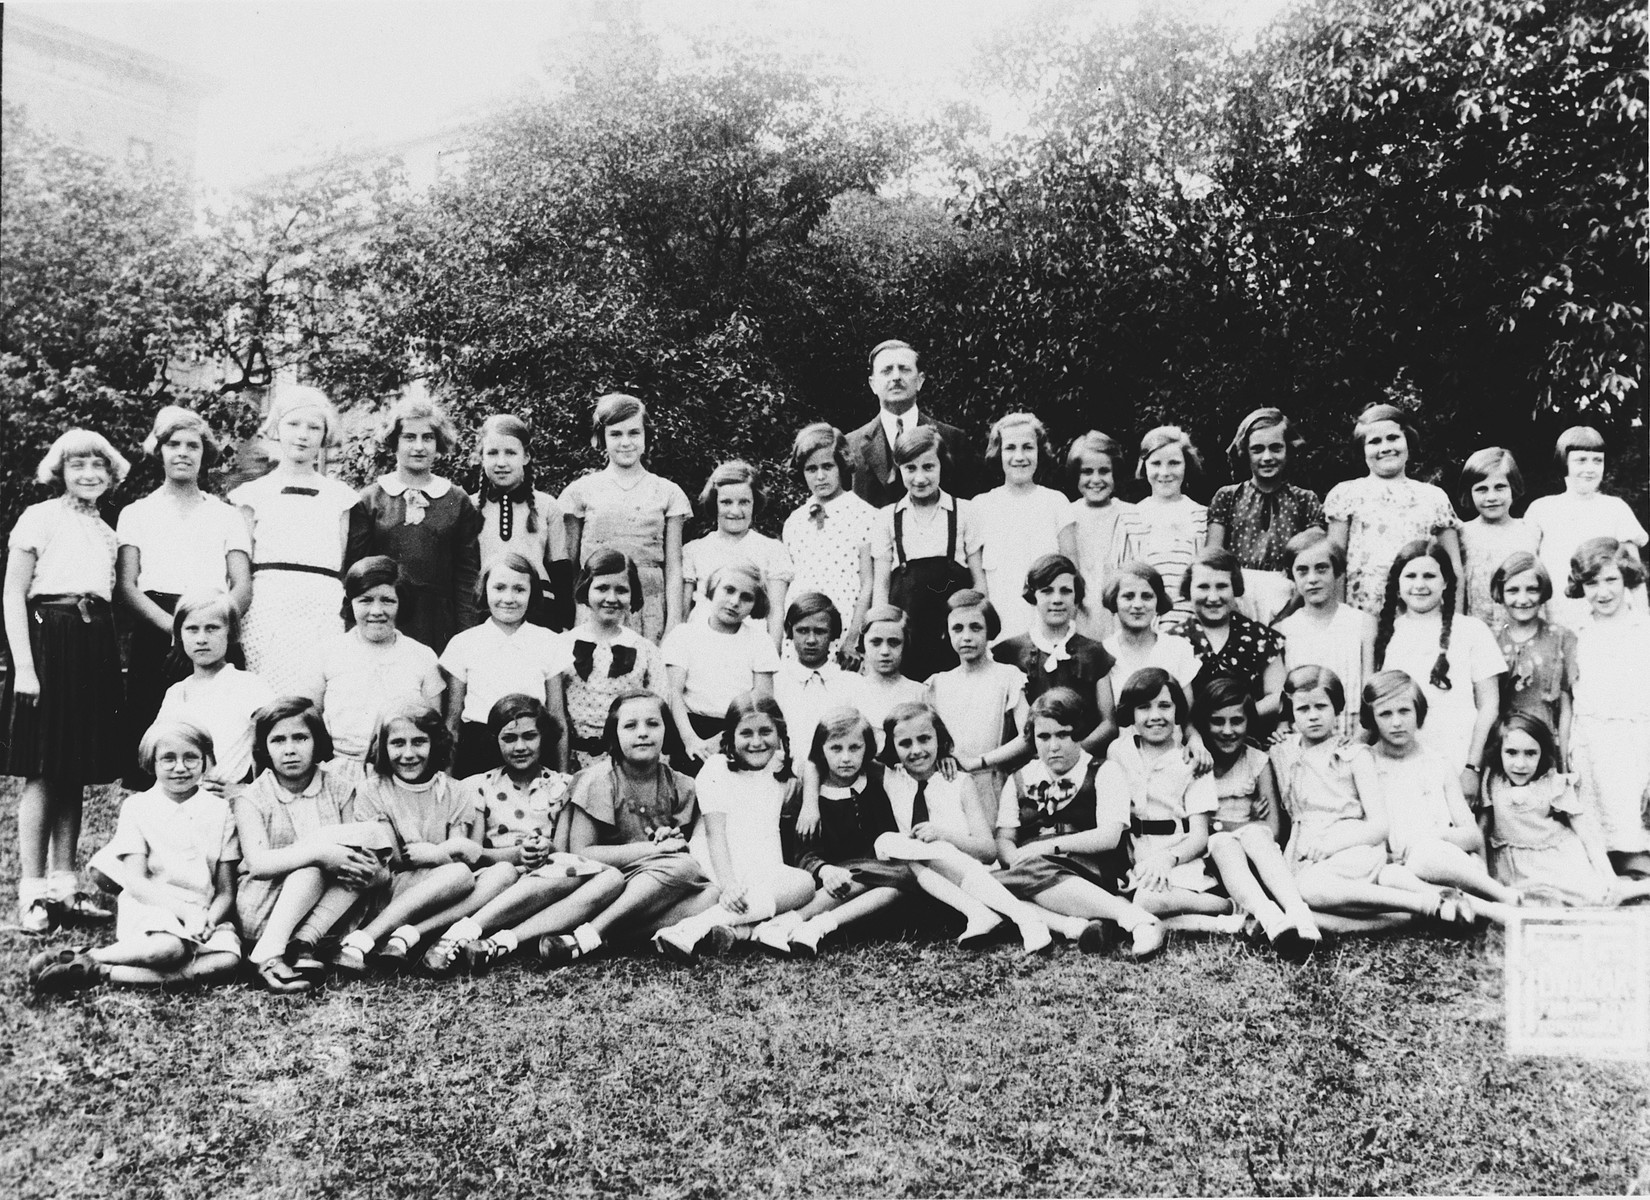 Group portrait of children from a public grammer school in Prague on an outing.  Some of the girls are Jewish.

Among those pictured is Hana Fuchs.